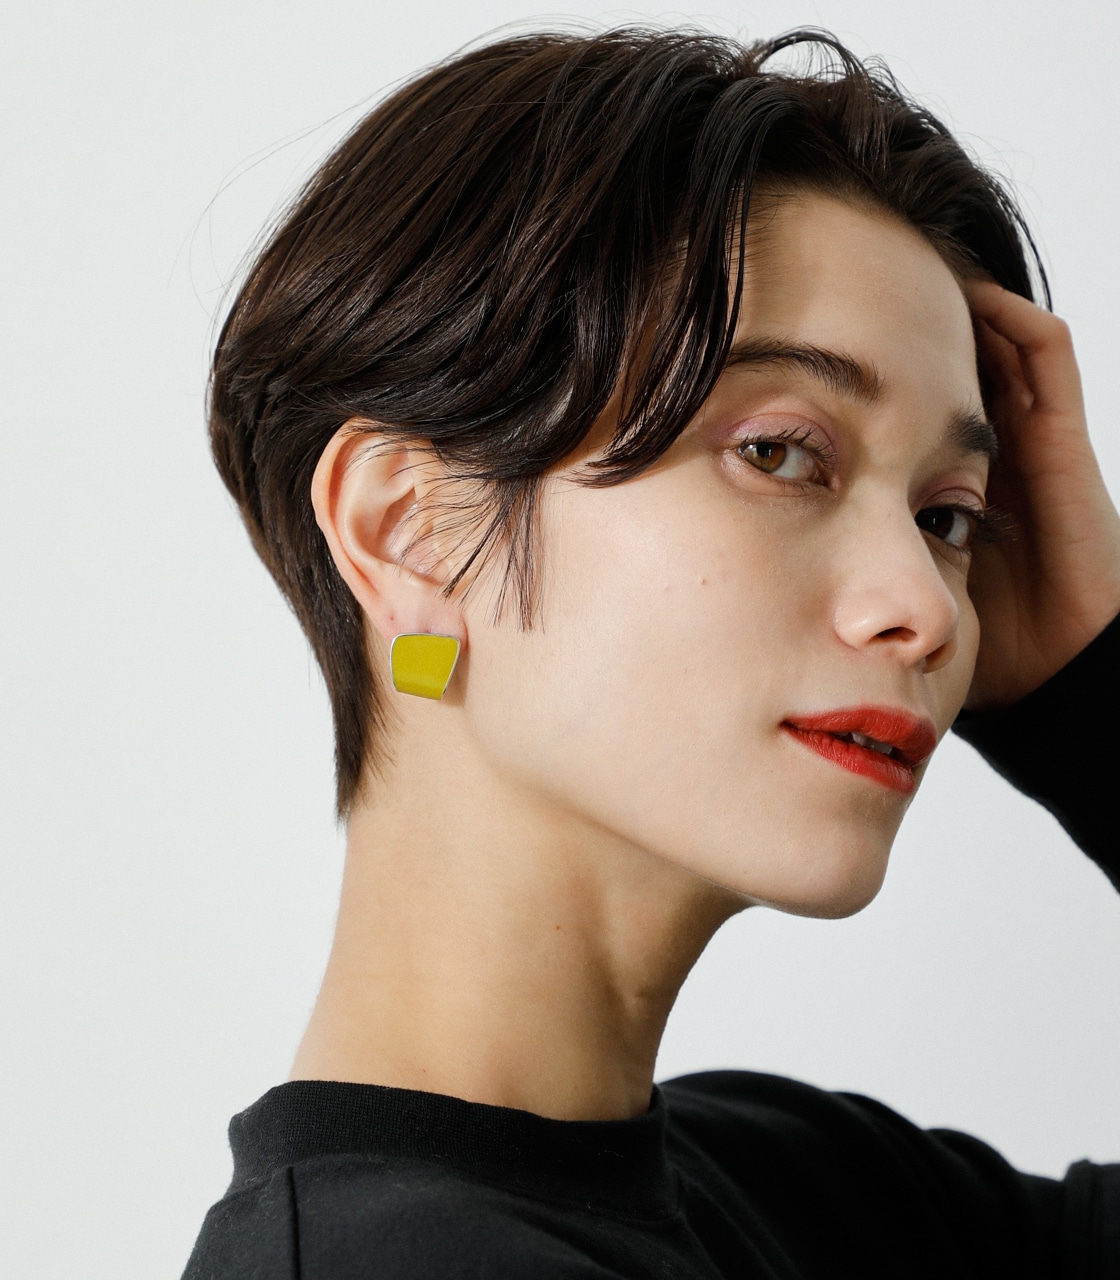 EPO SQUARE EARRINGS/エポスクエアピアス 詳細画像 LIME 7